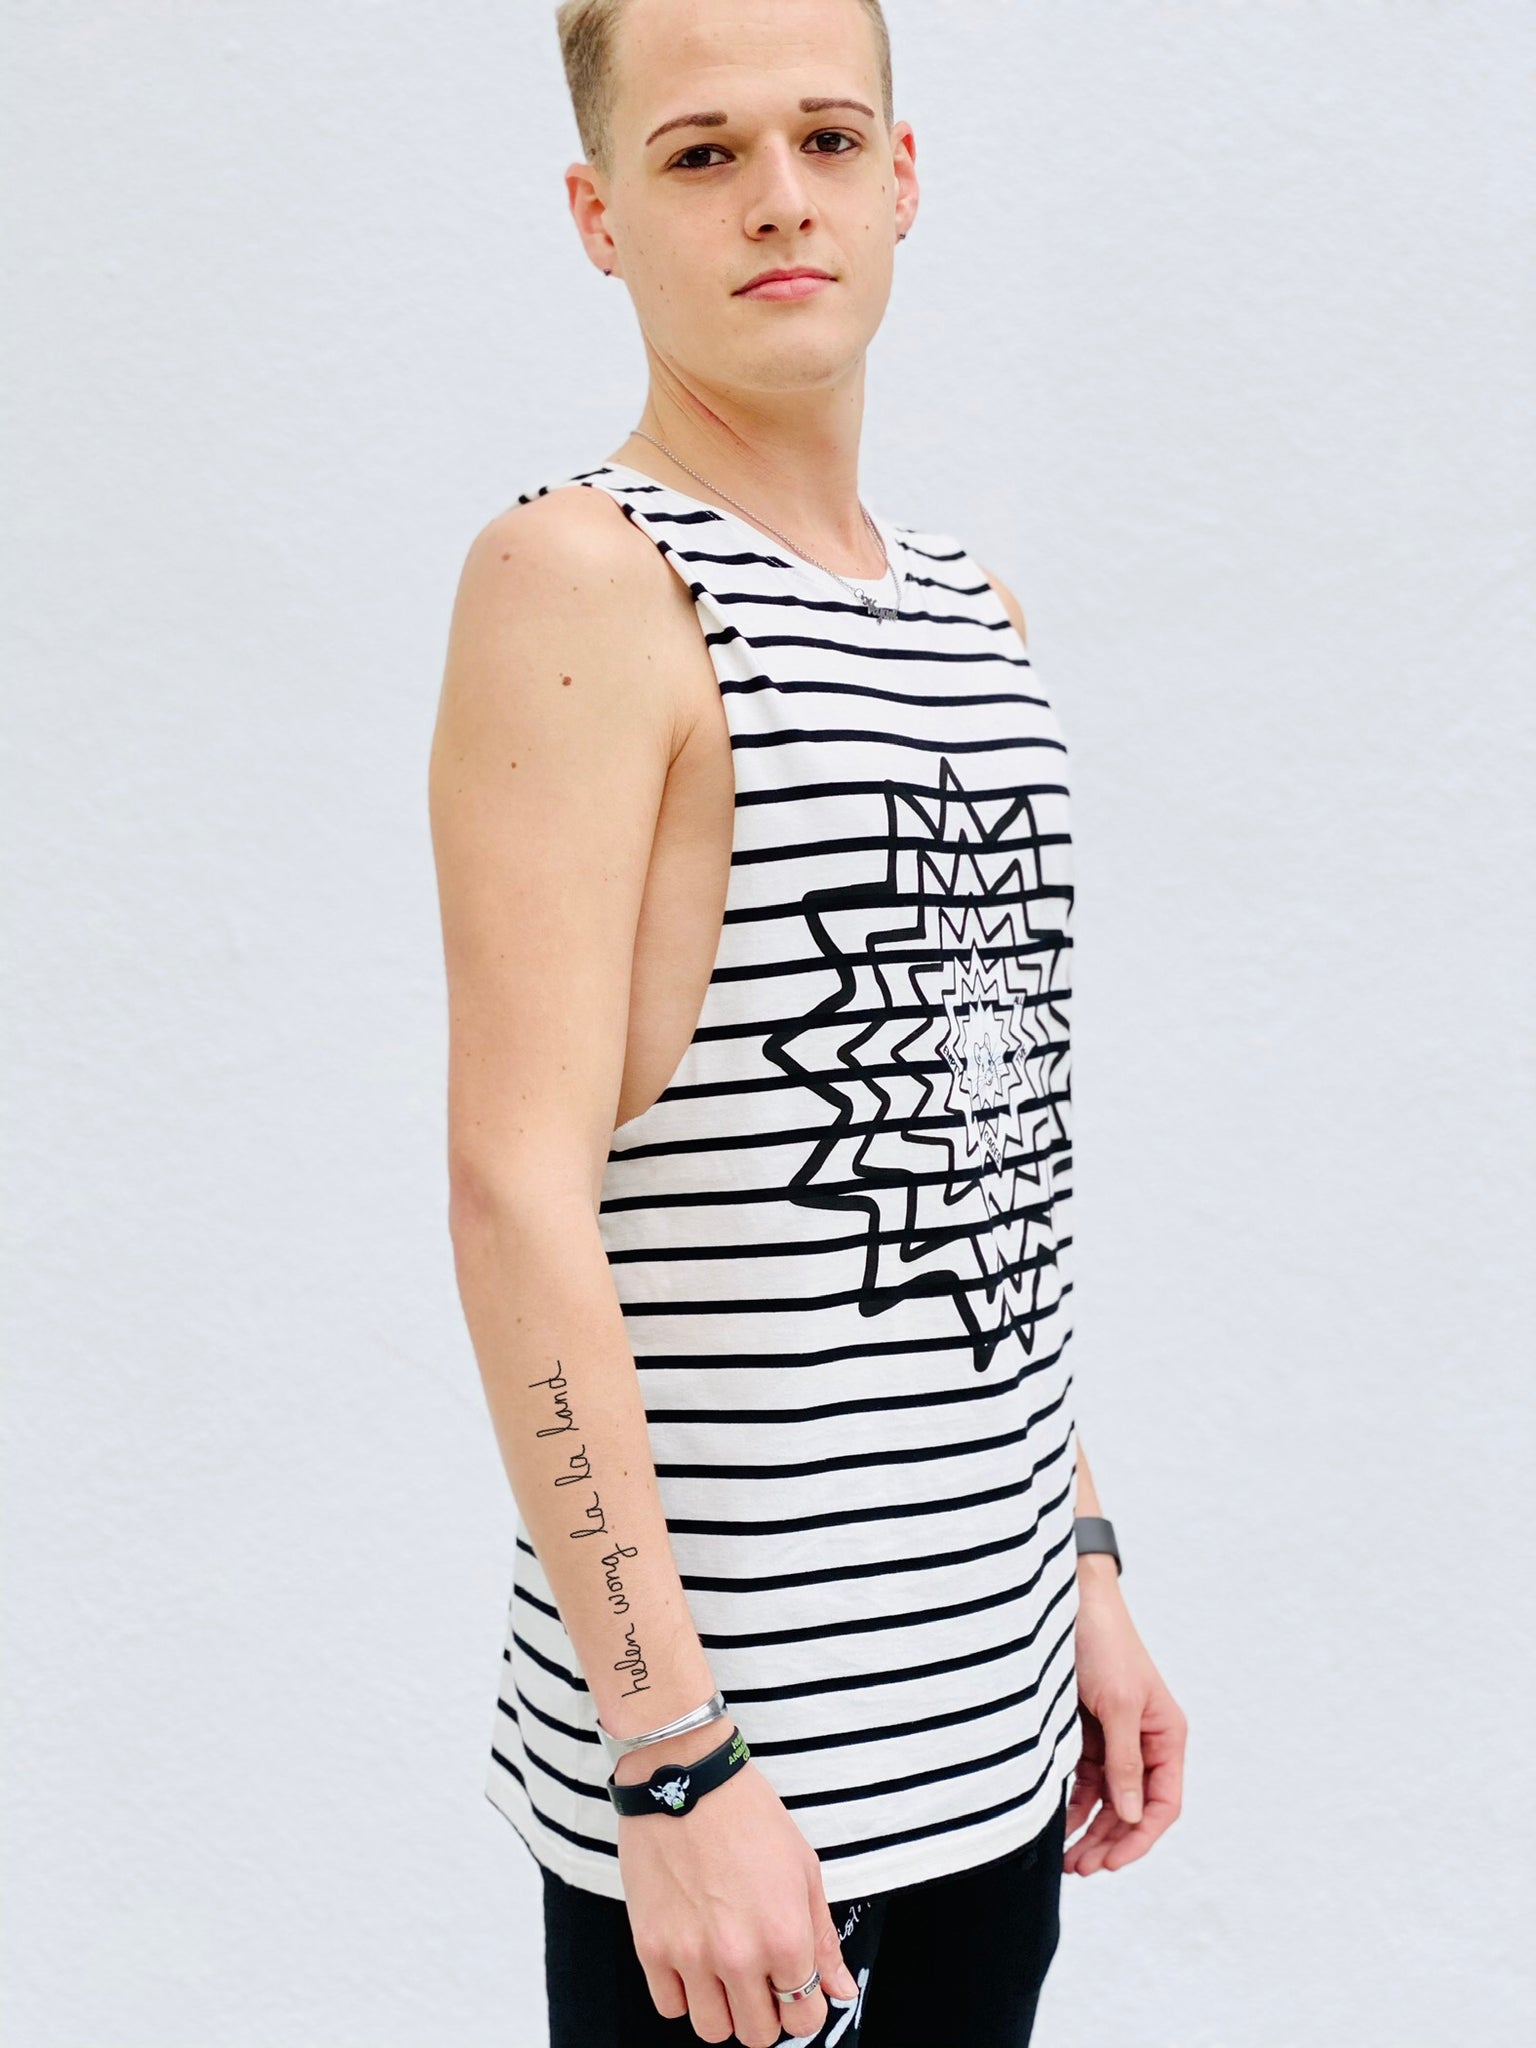 (S/S 2020) Empty All The Cages sleeveless tee in CREAM/BLACK STRIPE